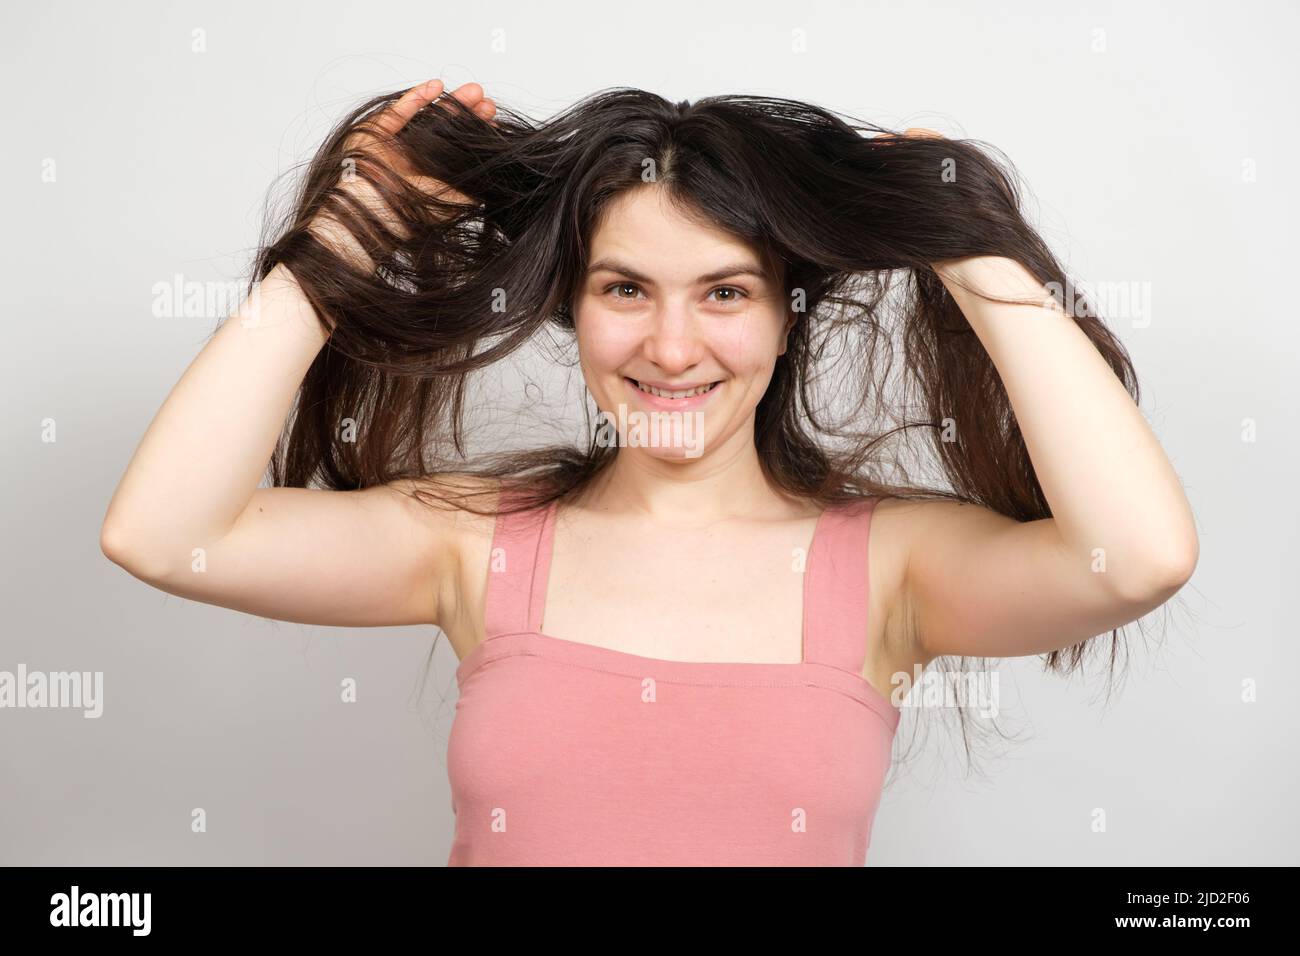 A beautiful brunette woman with long hair on a white background holds her hands on her head and thinks about what hairstyle to do Stock Photo